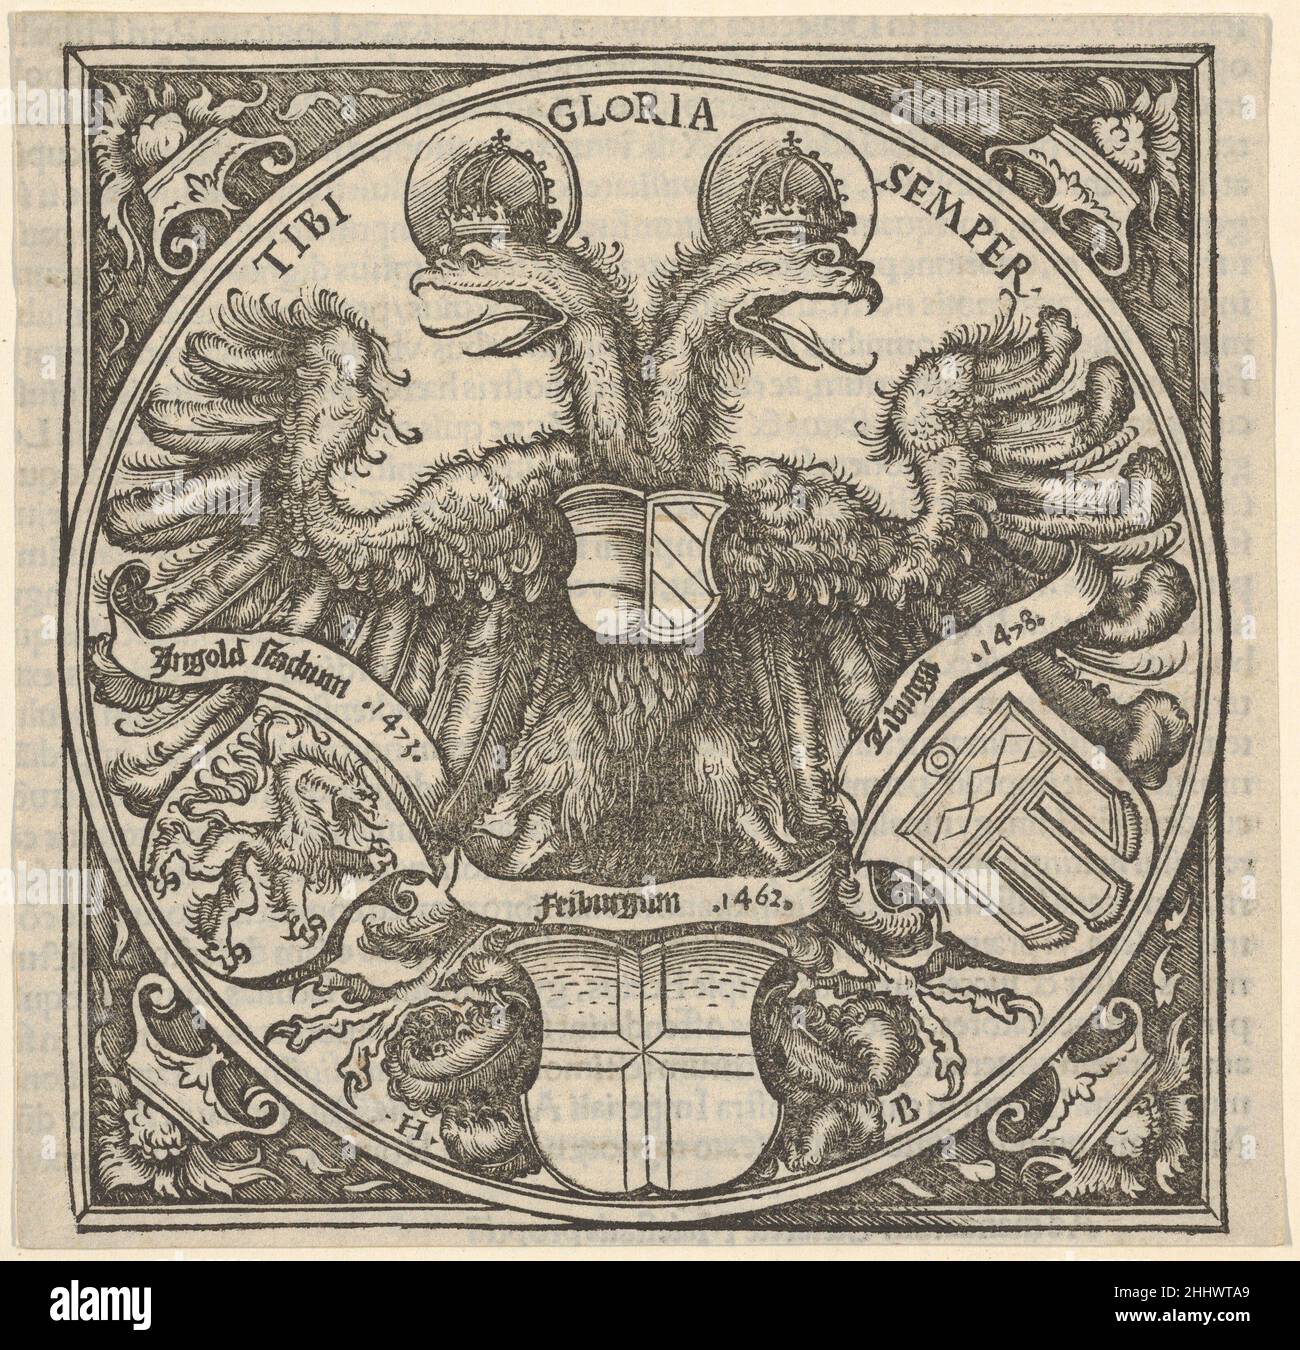 Imperial Double Eagle with the Coat of Arms of Ingolstadt, Freiburg, and Tübingen, from Joan. Eckii Theologi in summulas Petri Hispani extemporaria et succincta atque succosa explanatio p[ro] sup[er] ioris Germaniae scholasticis 1516 Hans Burgkmair German Double-headed eagle with three coat of arms below for the university-towns of Ingolstadt, Feiburg, and Tübingen. This impression comes from the title-page of Johann Eck's 'Joan. Eckii Theologi in summulas Petri Hispani extemporaria et succincta atque succosa explanatio p[ro] sup[er] ioris Germaniae scholasticis,' published by Johann Miller in Stock Photo